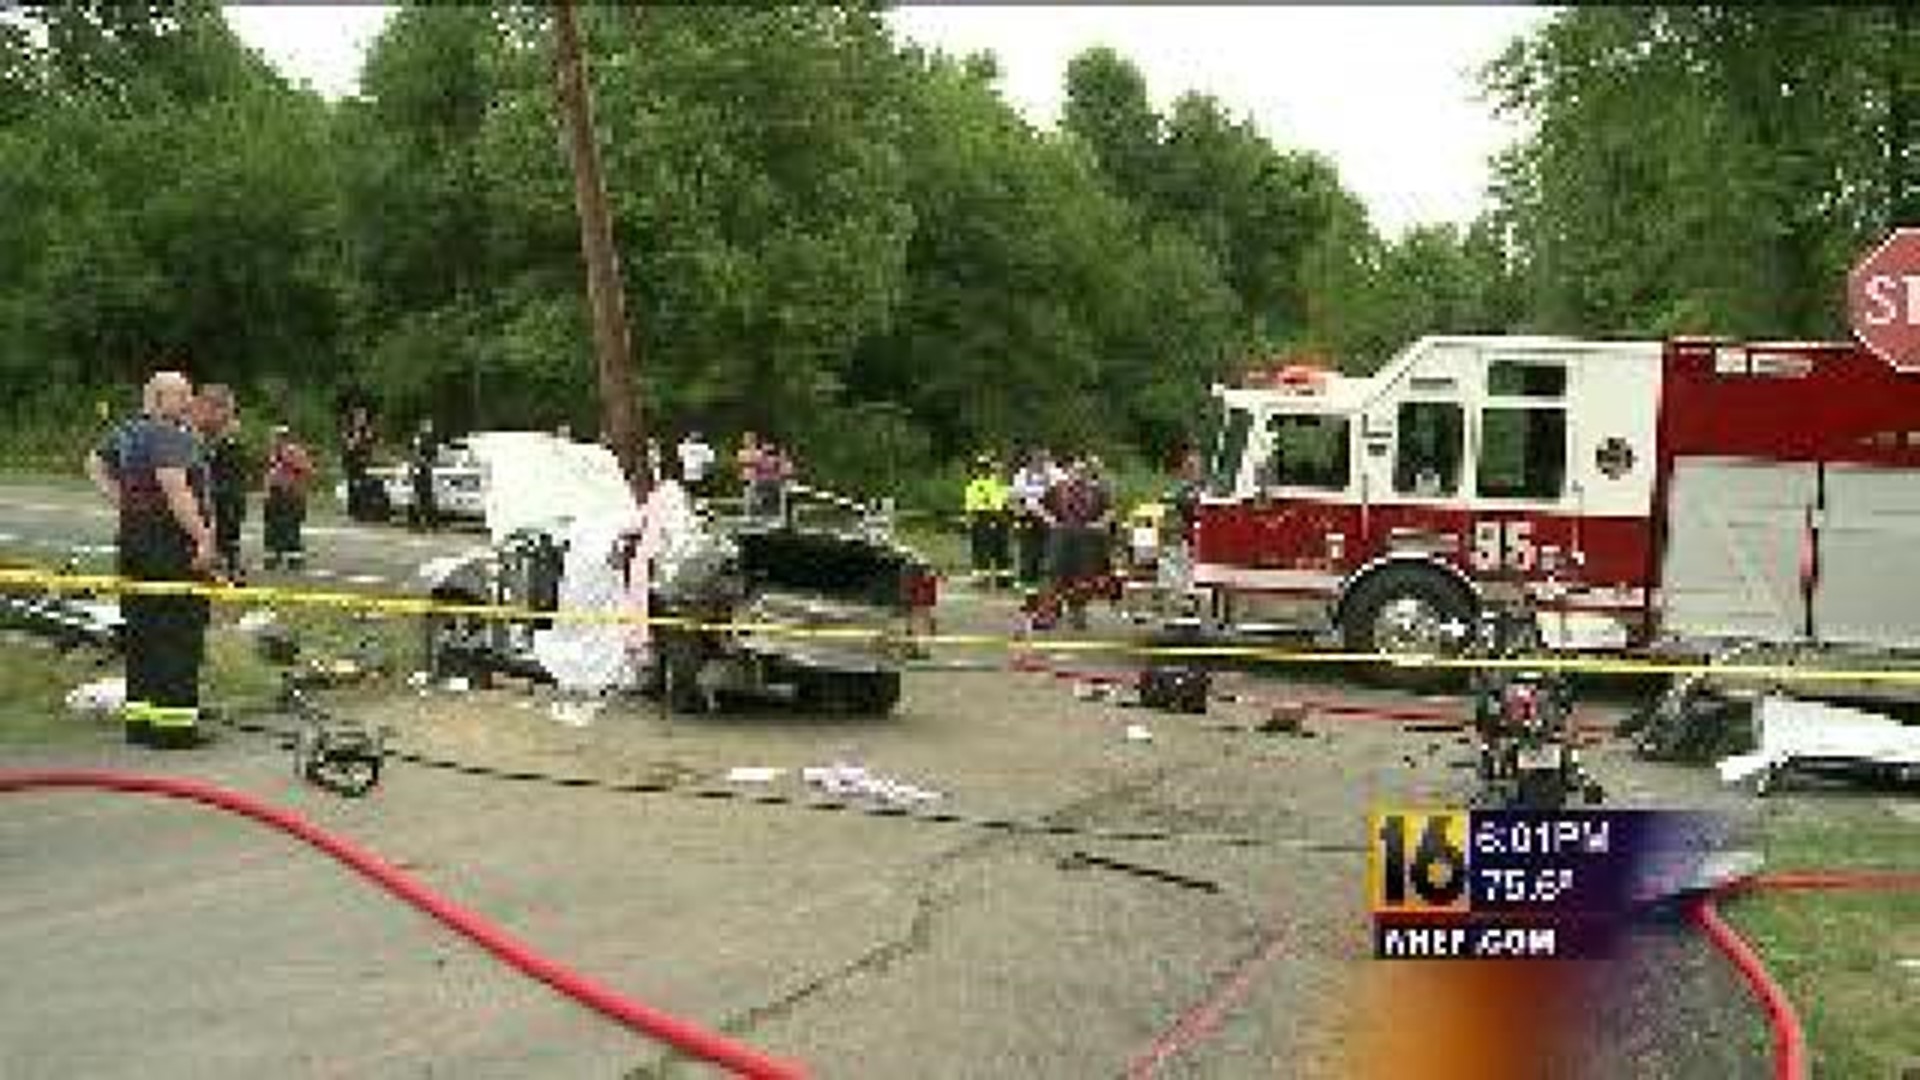 Deadly Crash; Police Say Driver Possibly Intoxicated